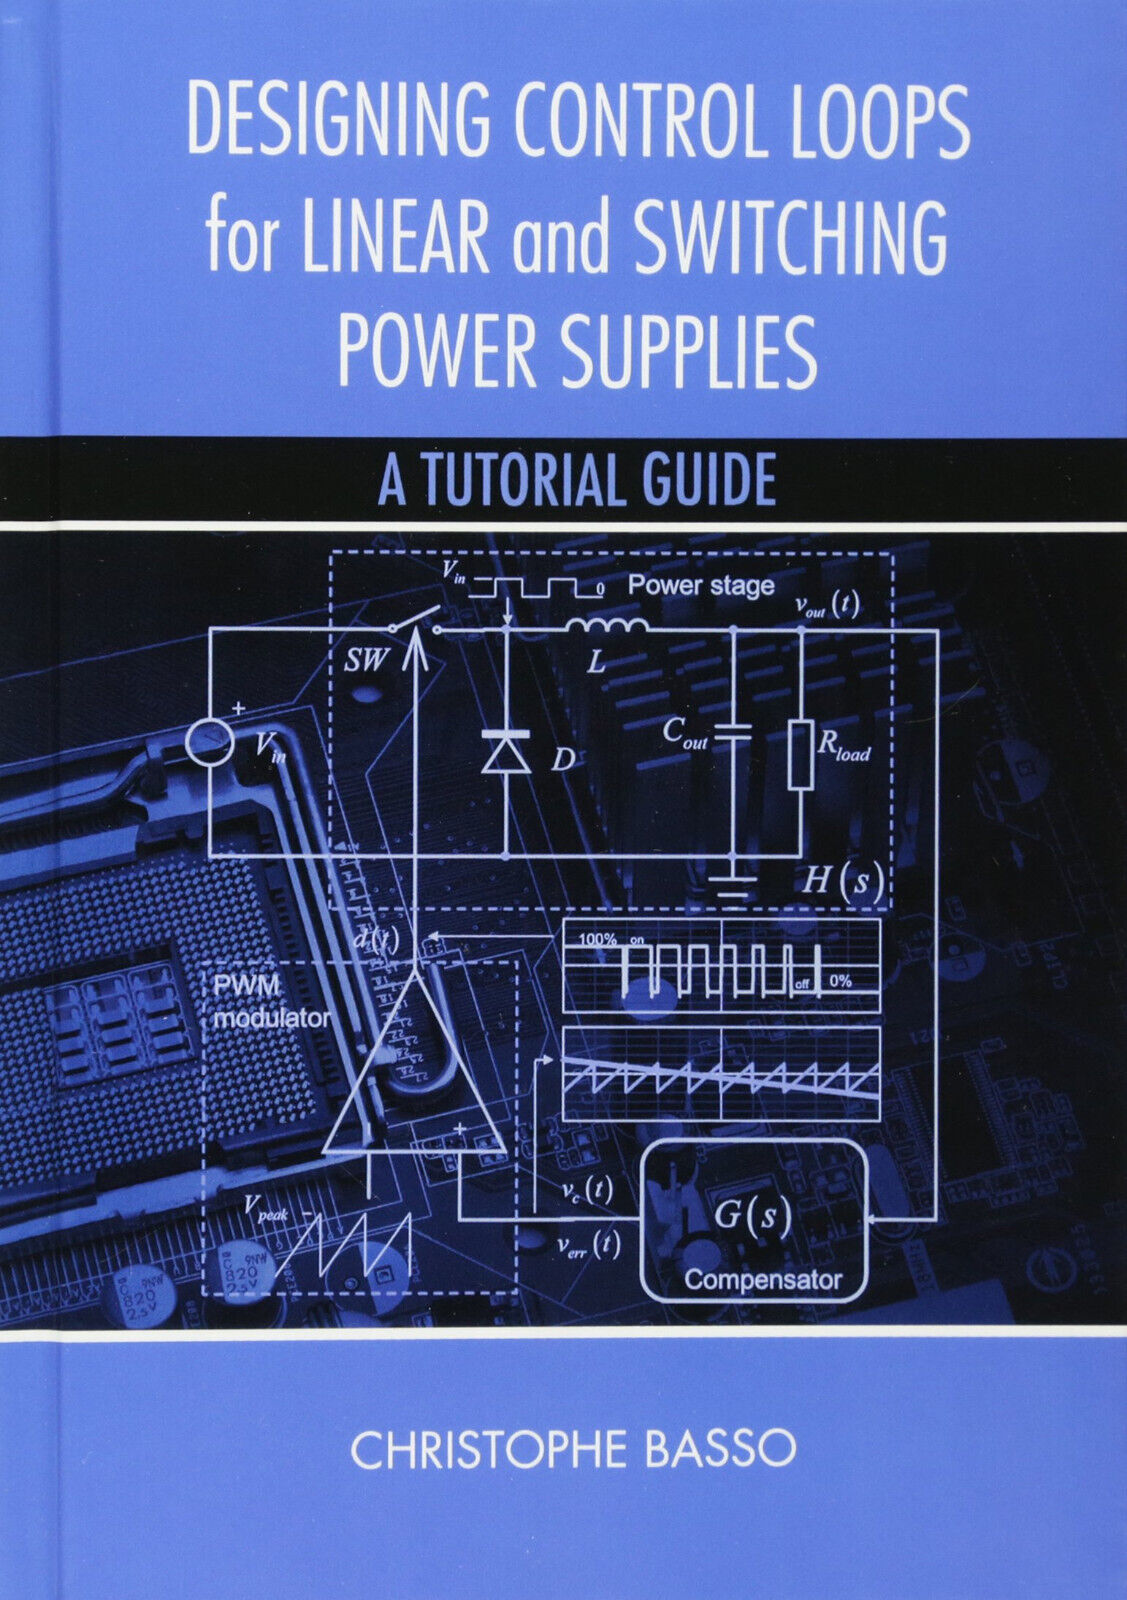 Designing Control Loops for Linear and Switching Power Supplies - 2000 libro usato